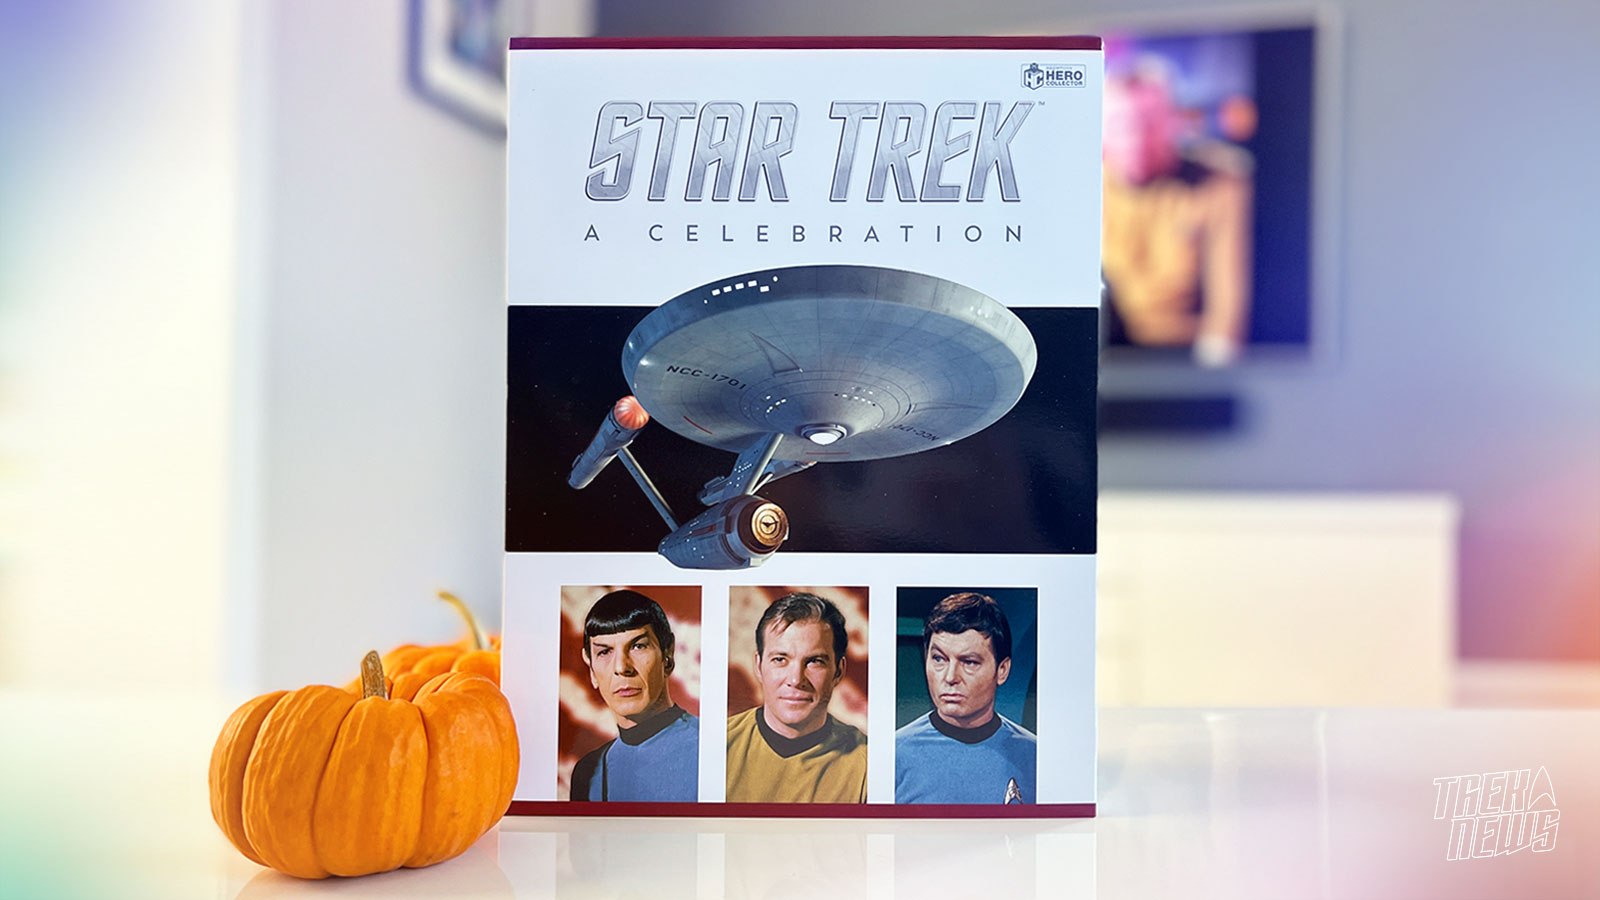 Star Trek: A Celebration Review: One Of The Most Comprehensive Books Looking At The Legacy Of ‘The Original Series’